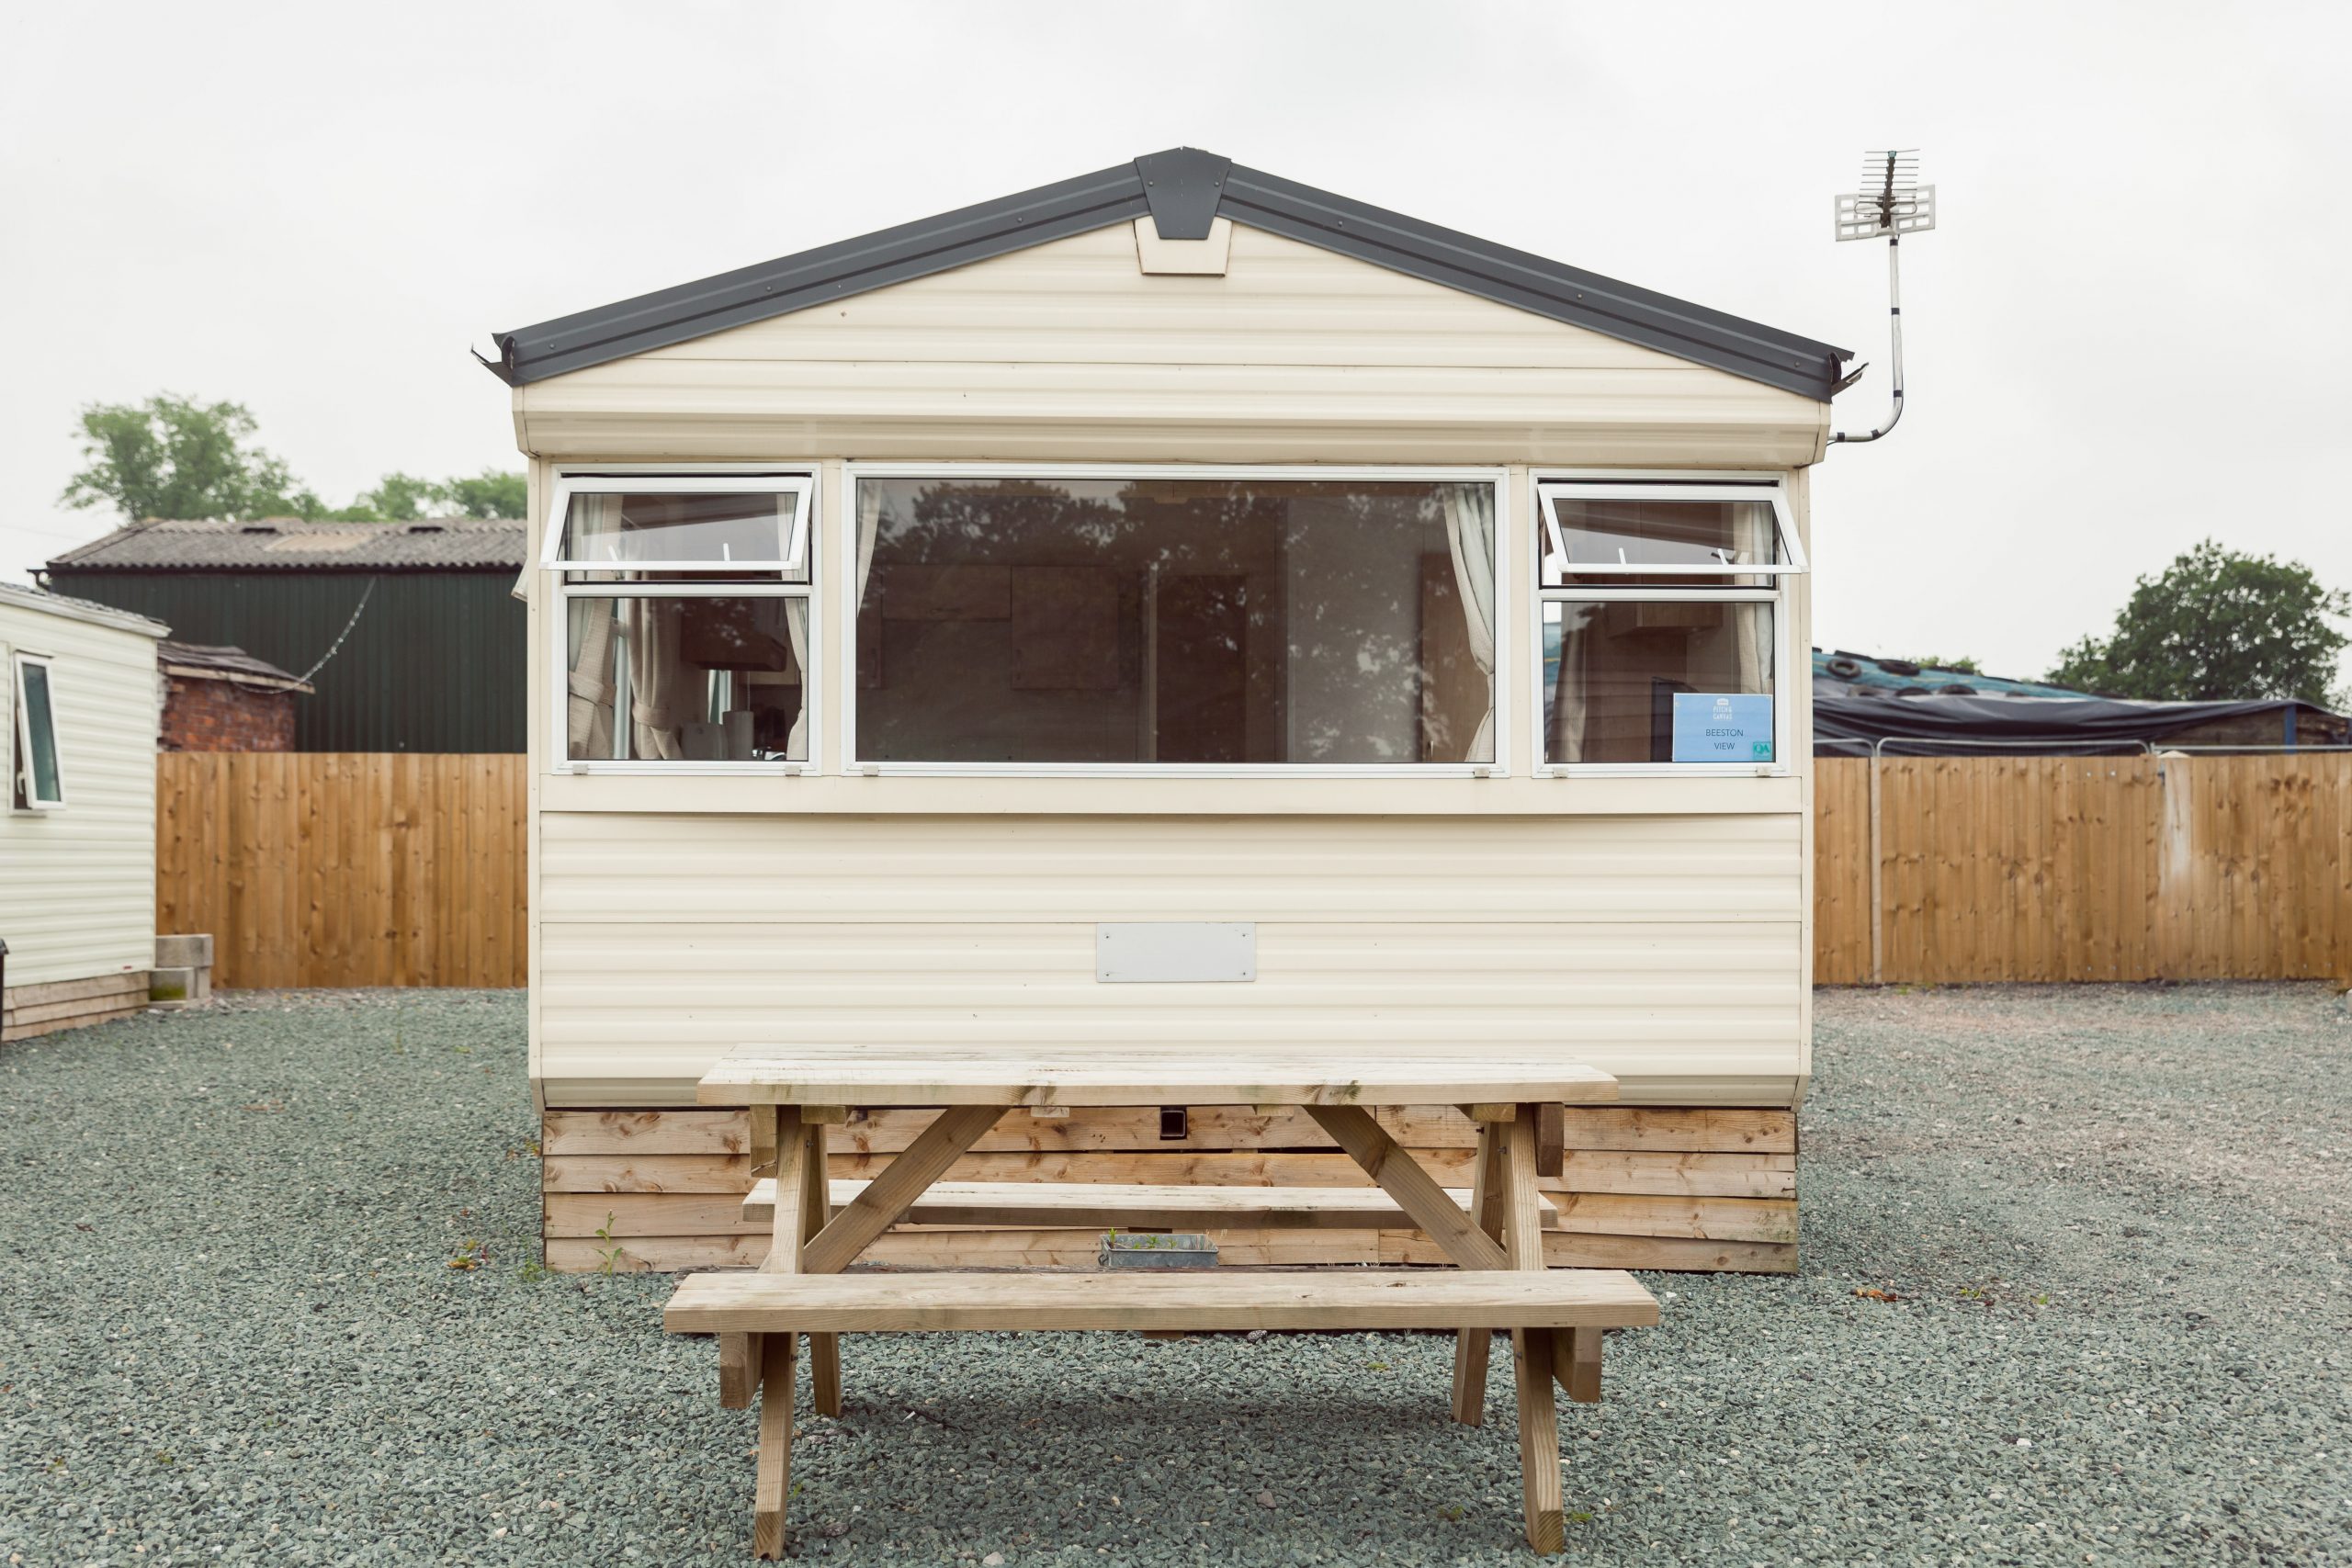 Pitch and Canvas | Glamping and Camping in Cheshire | Caravan